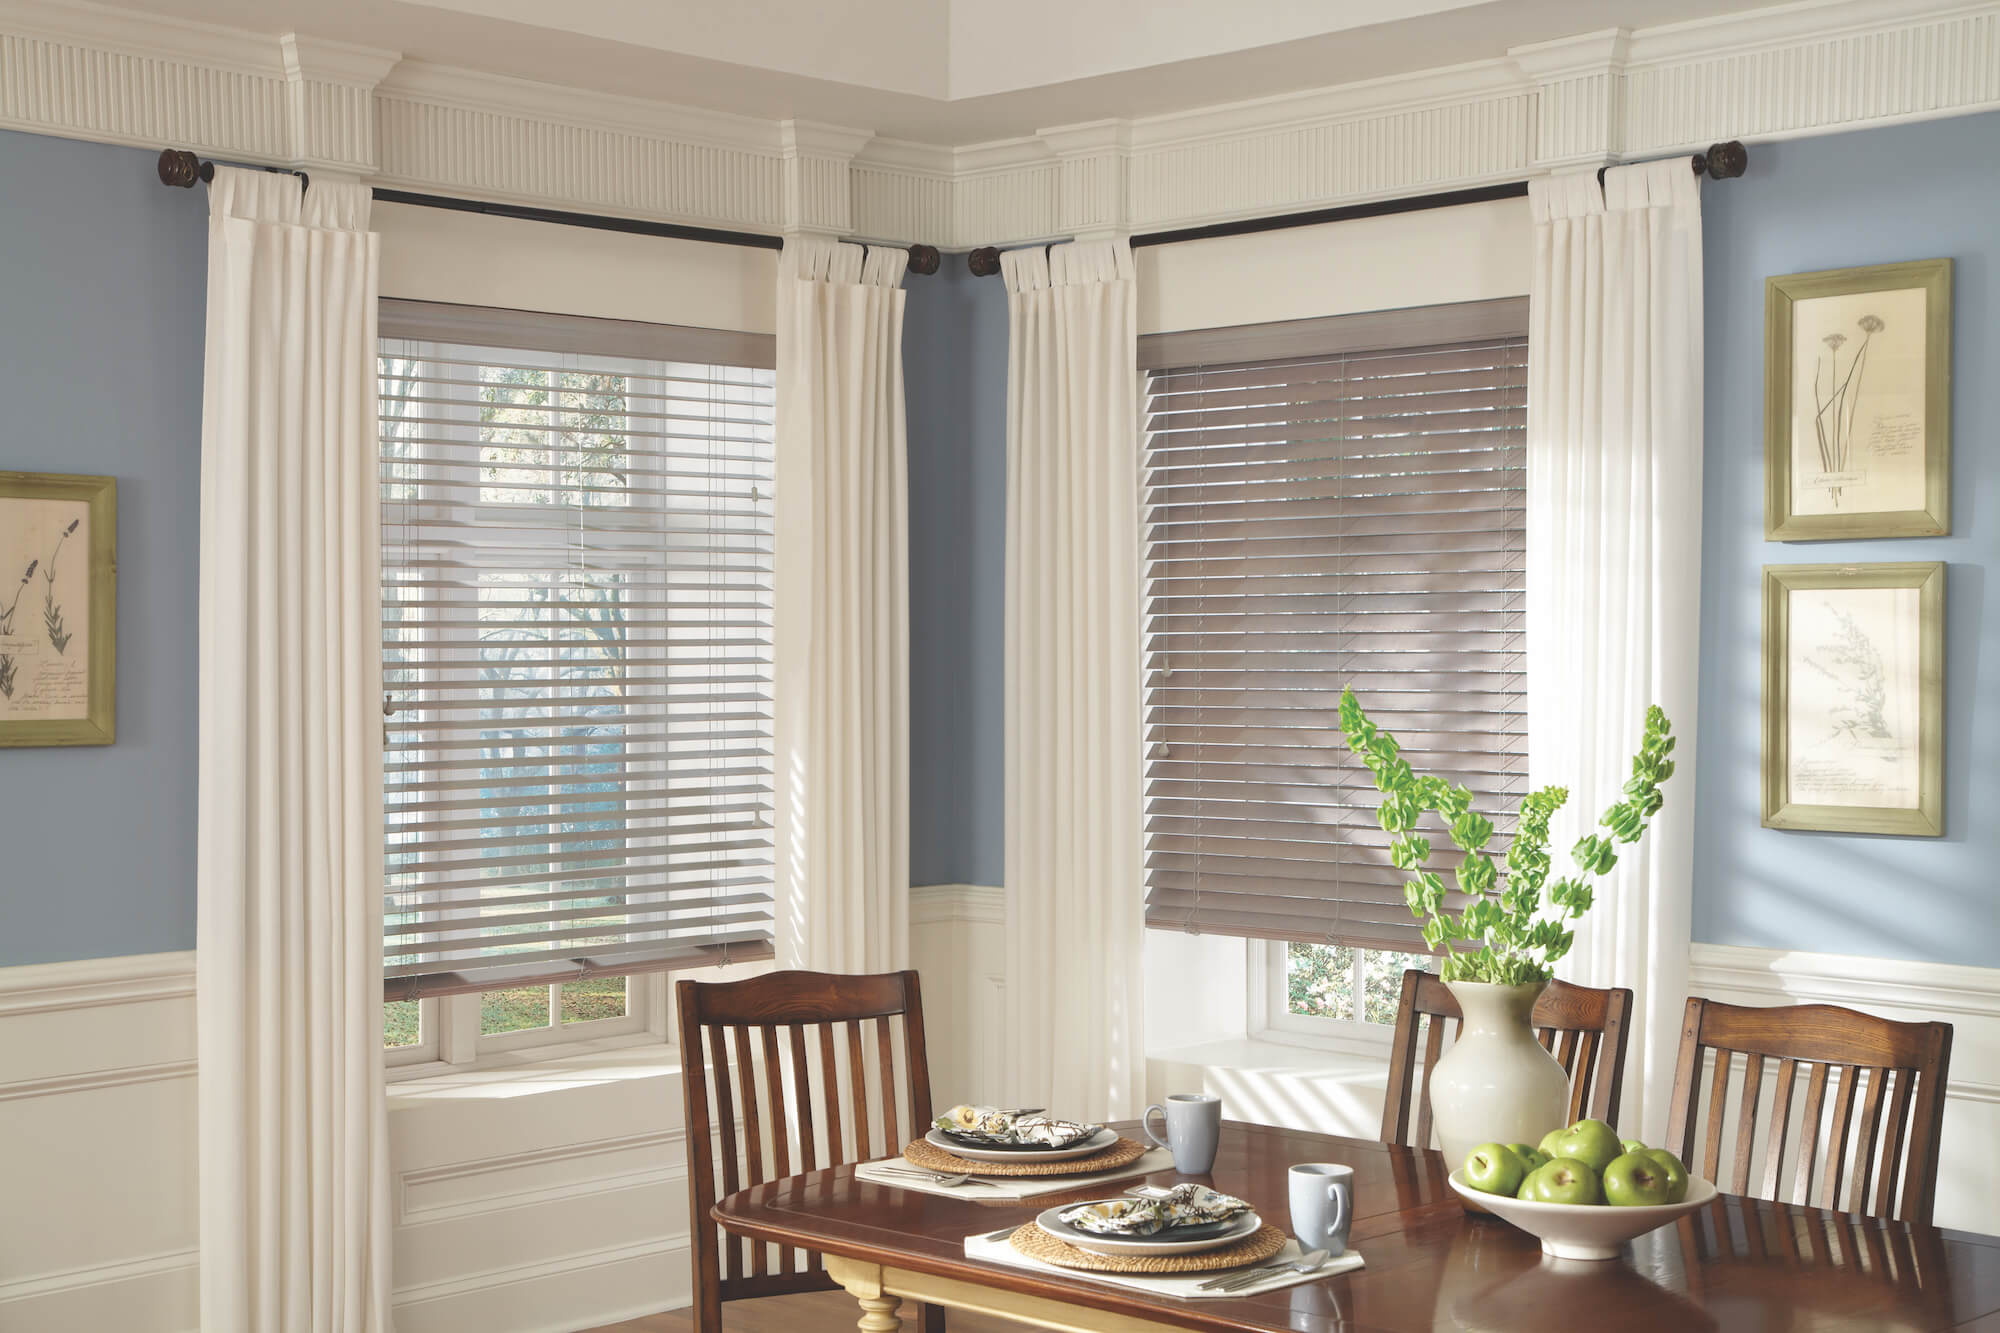 Child-Safe Window Coverings: A Guide to Kid-Friendly Blinds and Curtains